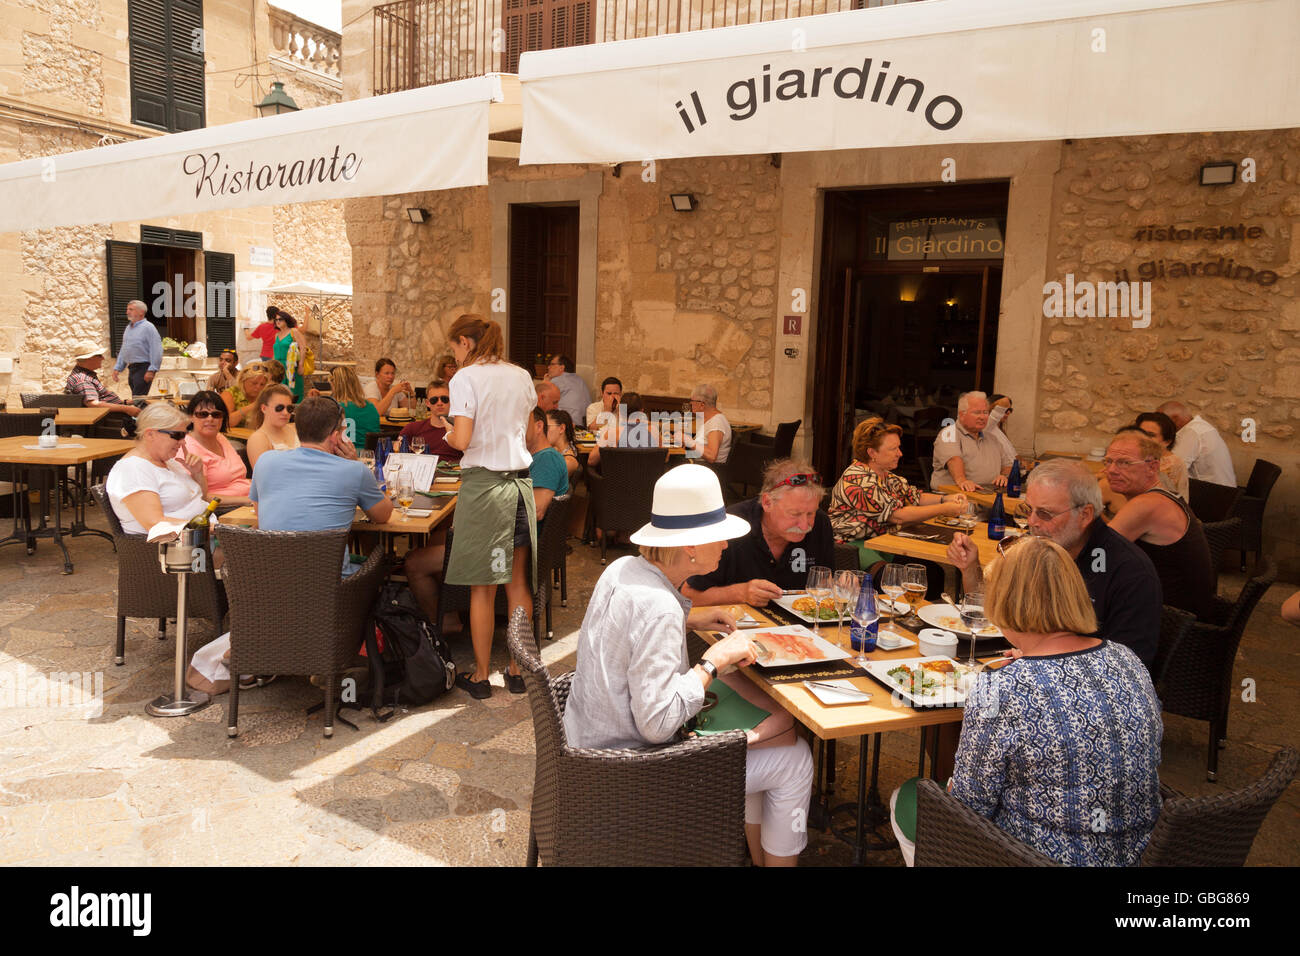 People eating and drinking outdoors at a restaurant, Alcudia, Mallorca ( Majorca ), Balearic Islands, Spain Europe Stock Photo